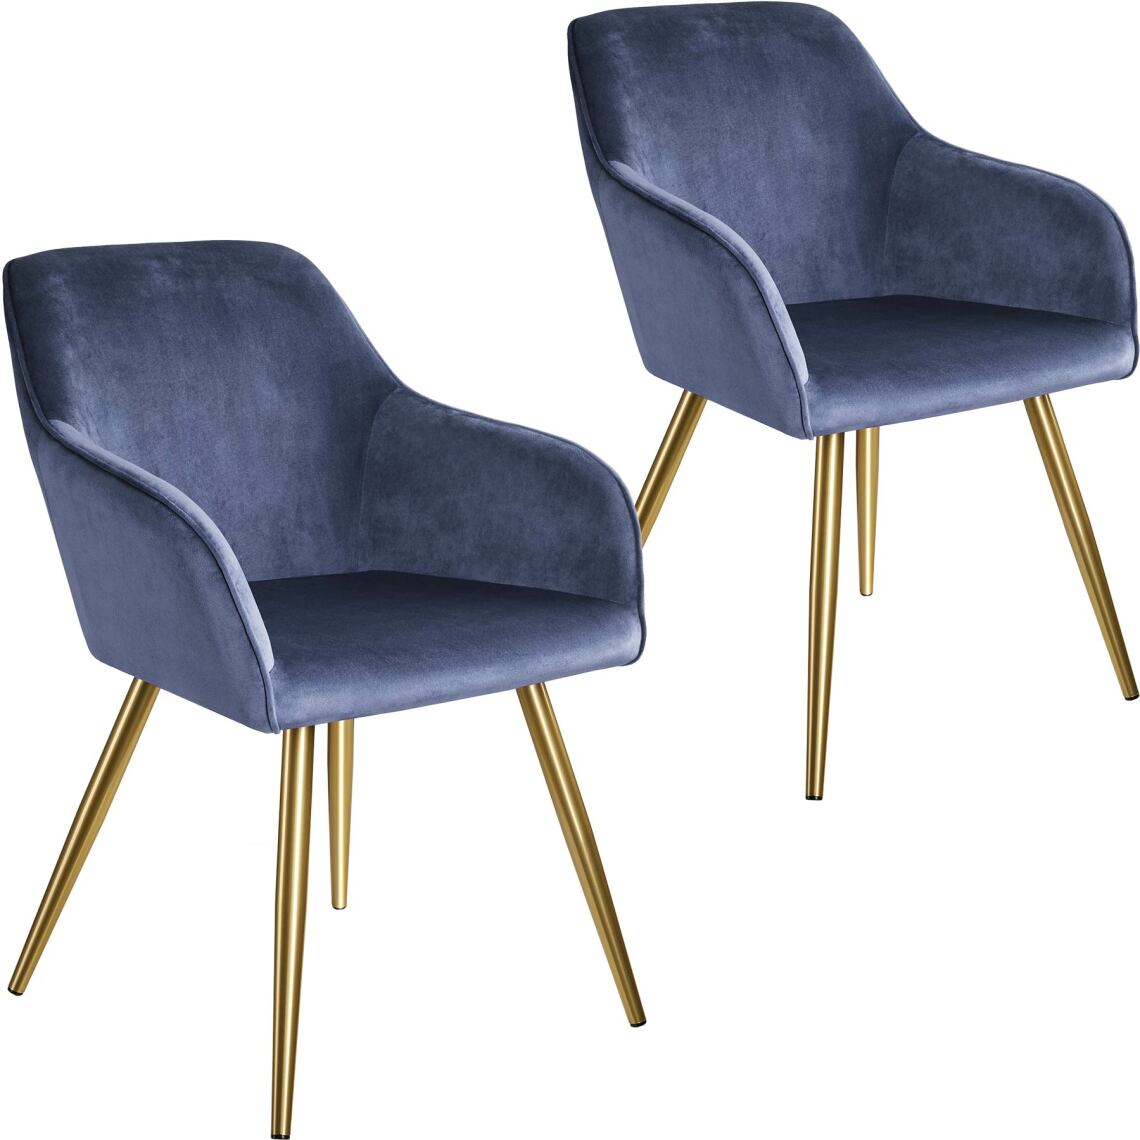 Tectake - 2 Chaises MARILYN Effet Velours Style Scandinave - bleu/or - Chaises